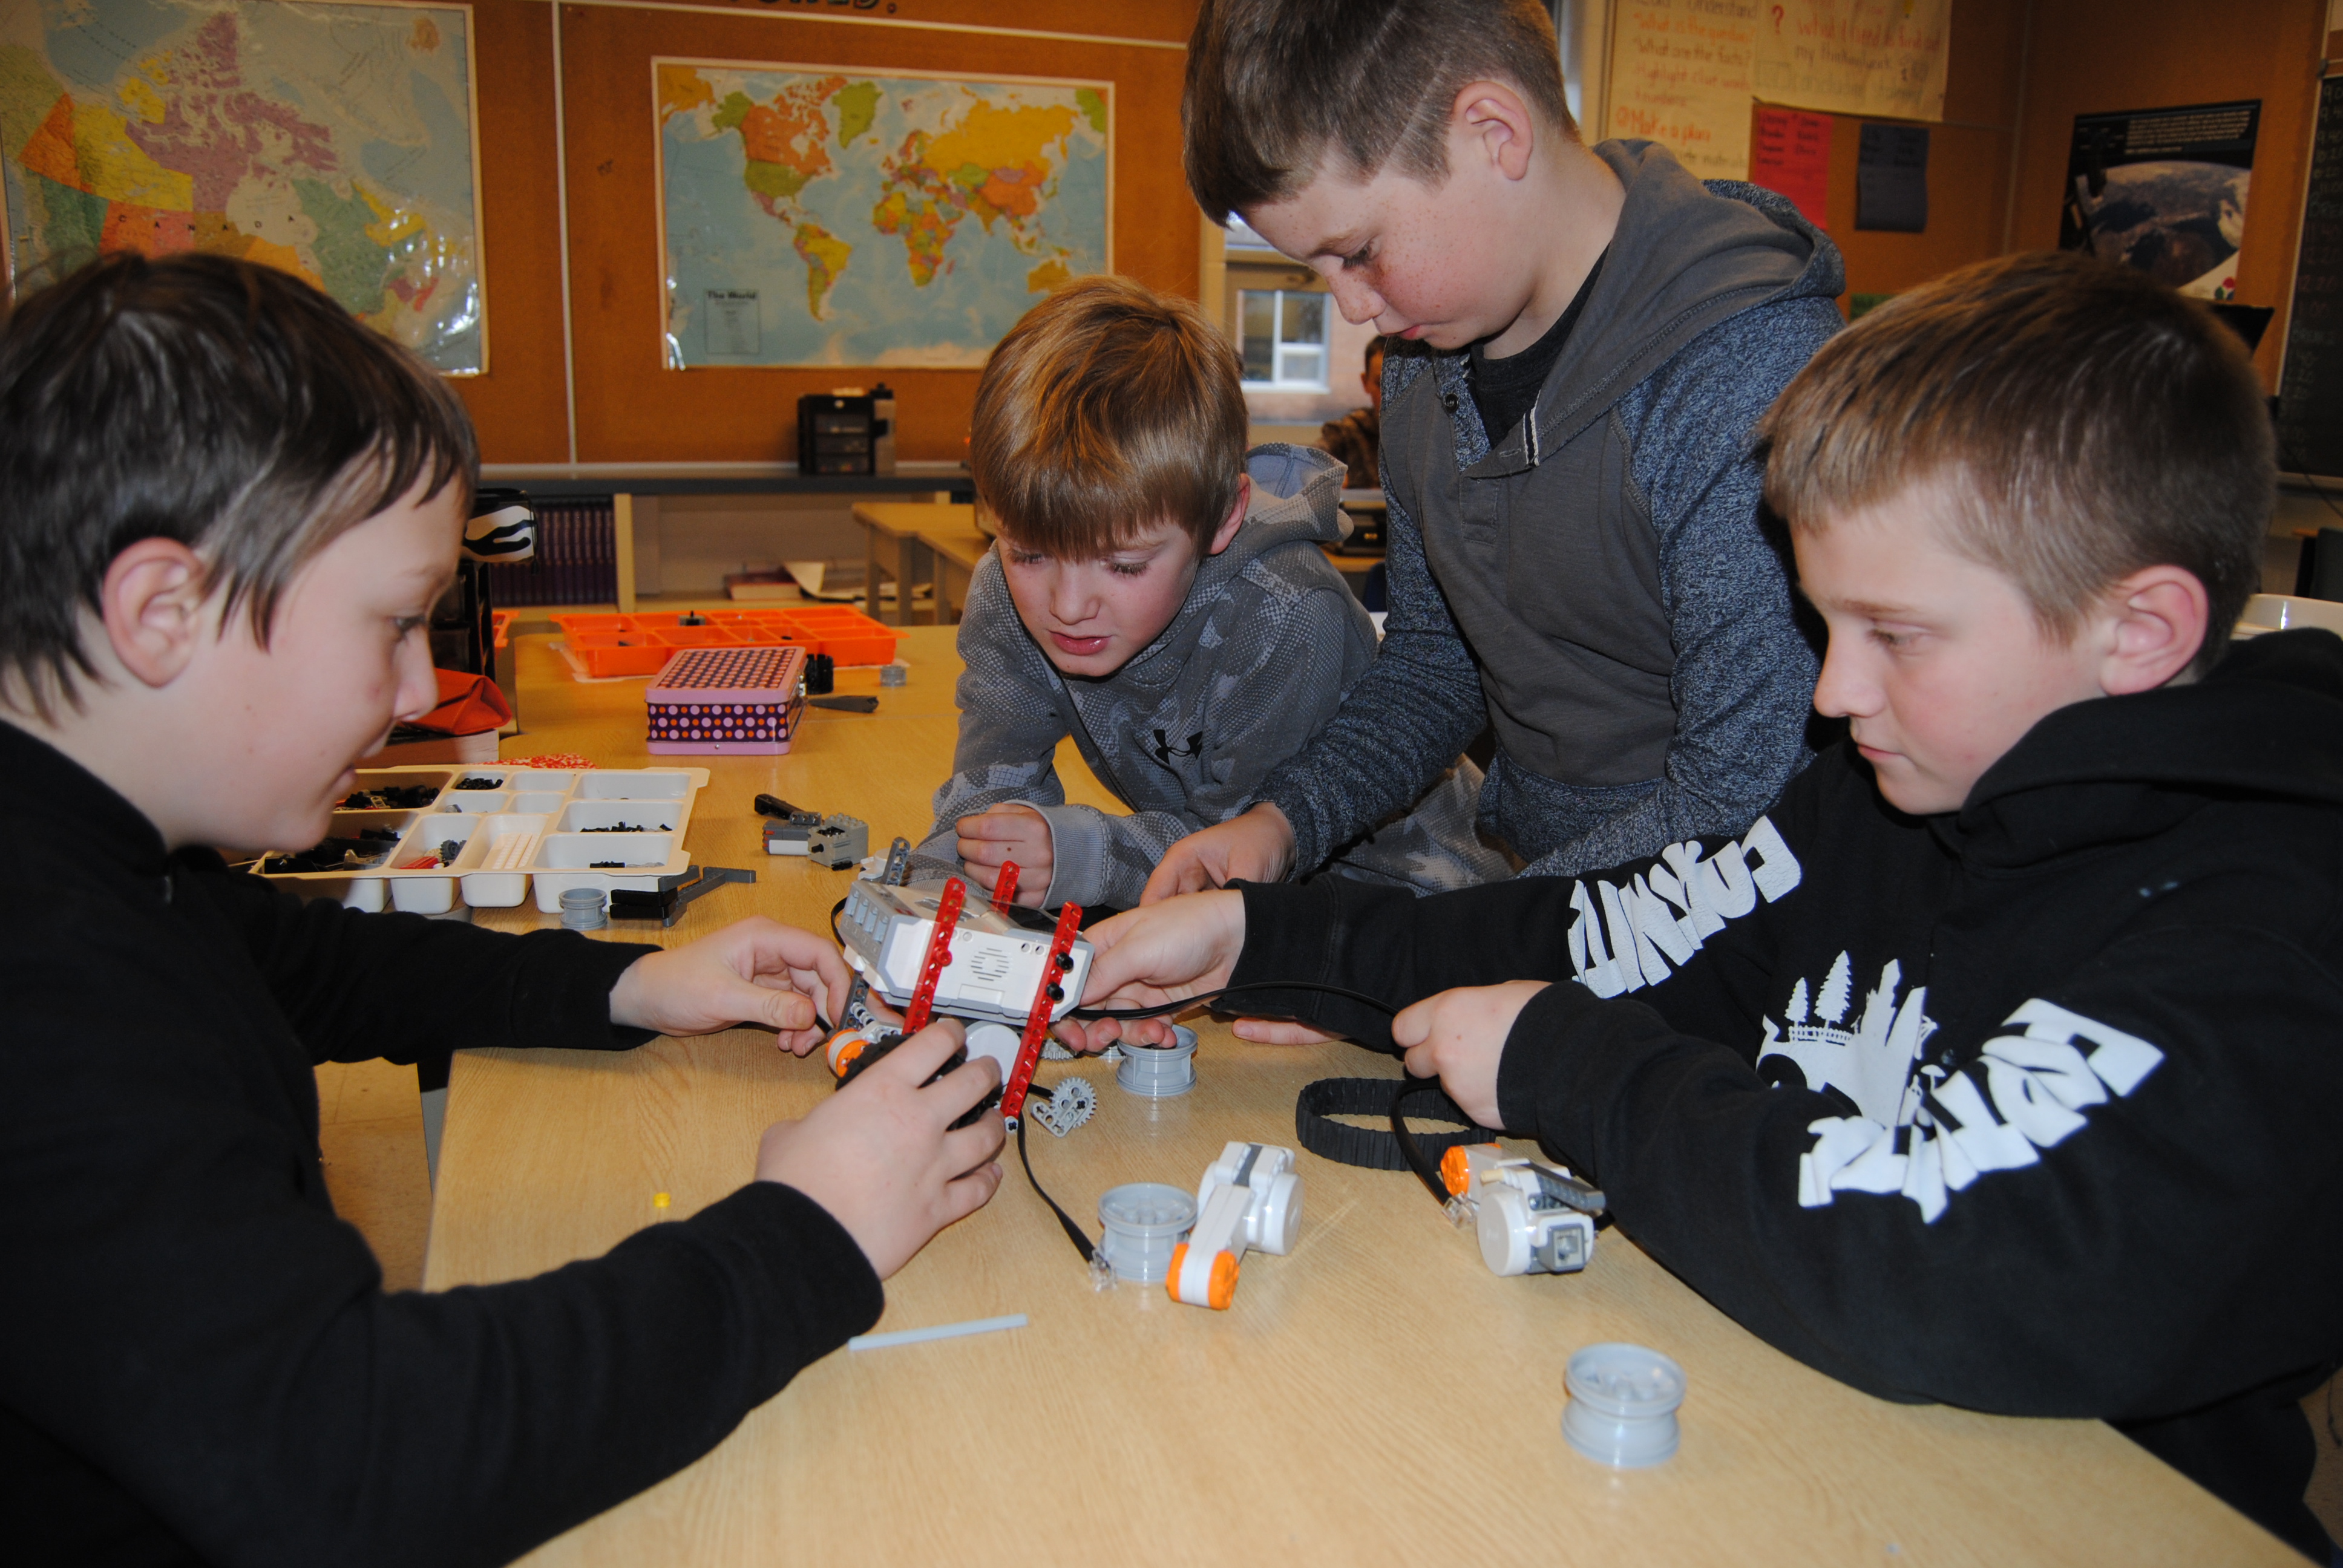 For the first time, students from Ripley-Huron Community School have the opportunity to participate in an after school LEGO league thanks to funding provided through the NWMO’s Early Investments in Education and Skills program.